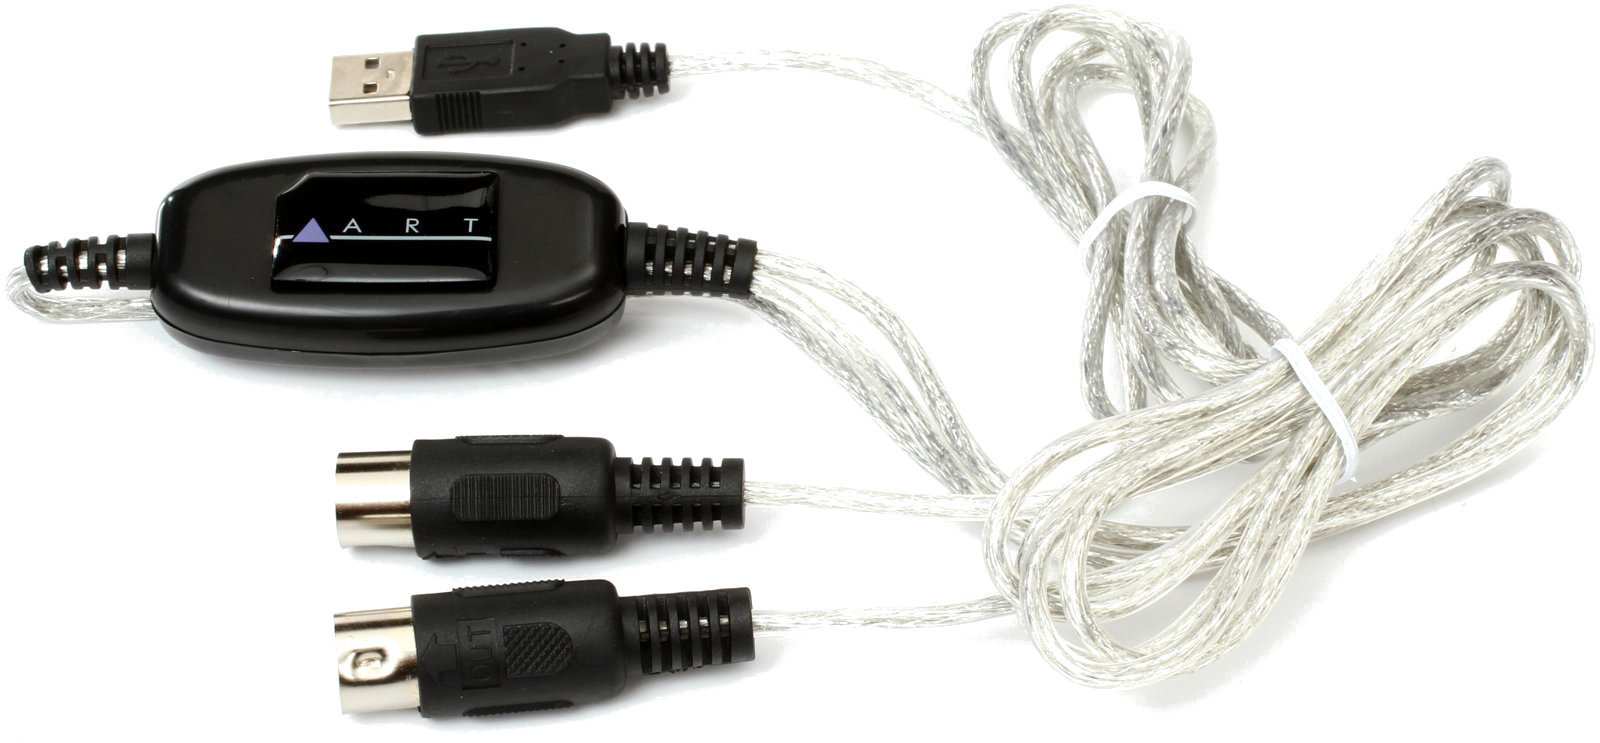 USB Audiointerface ART Mconnect USB-To-MIDI Cable